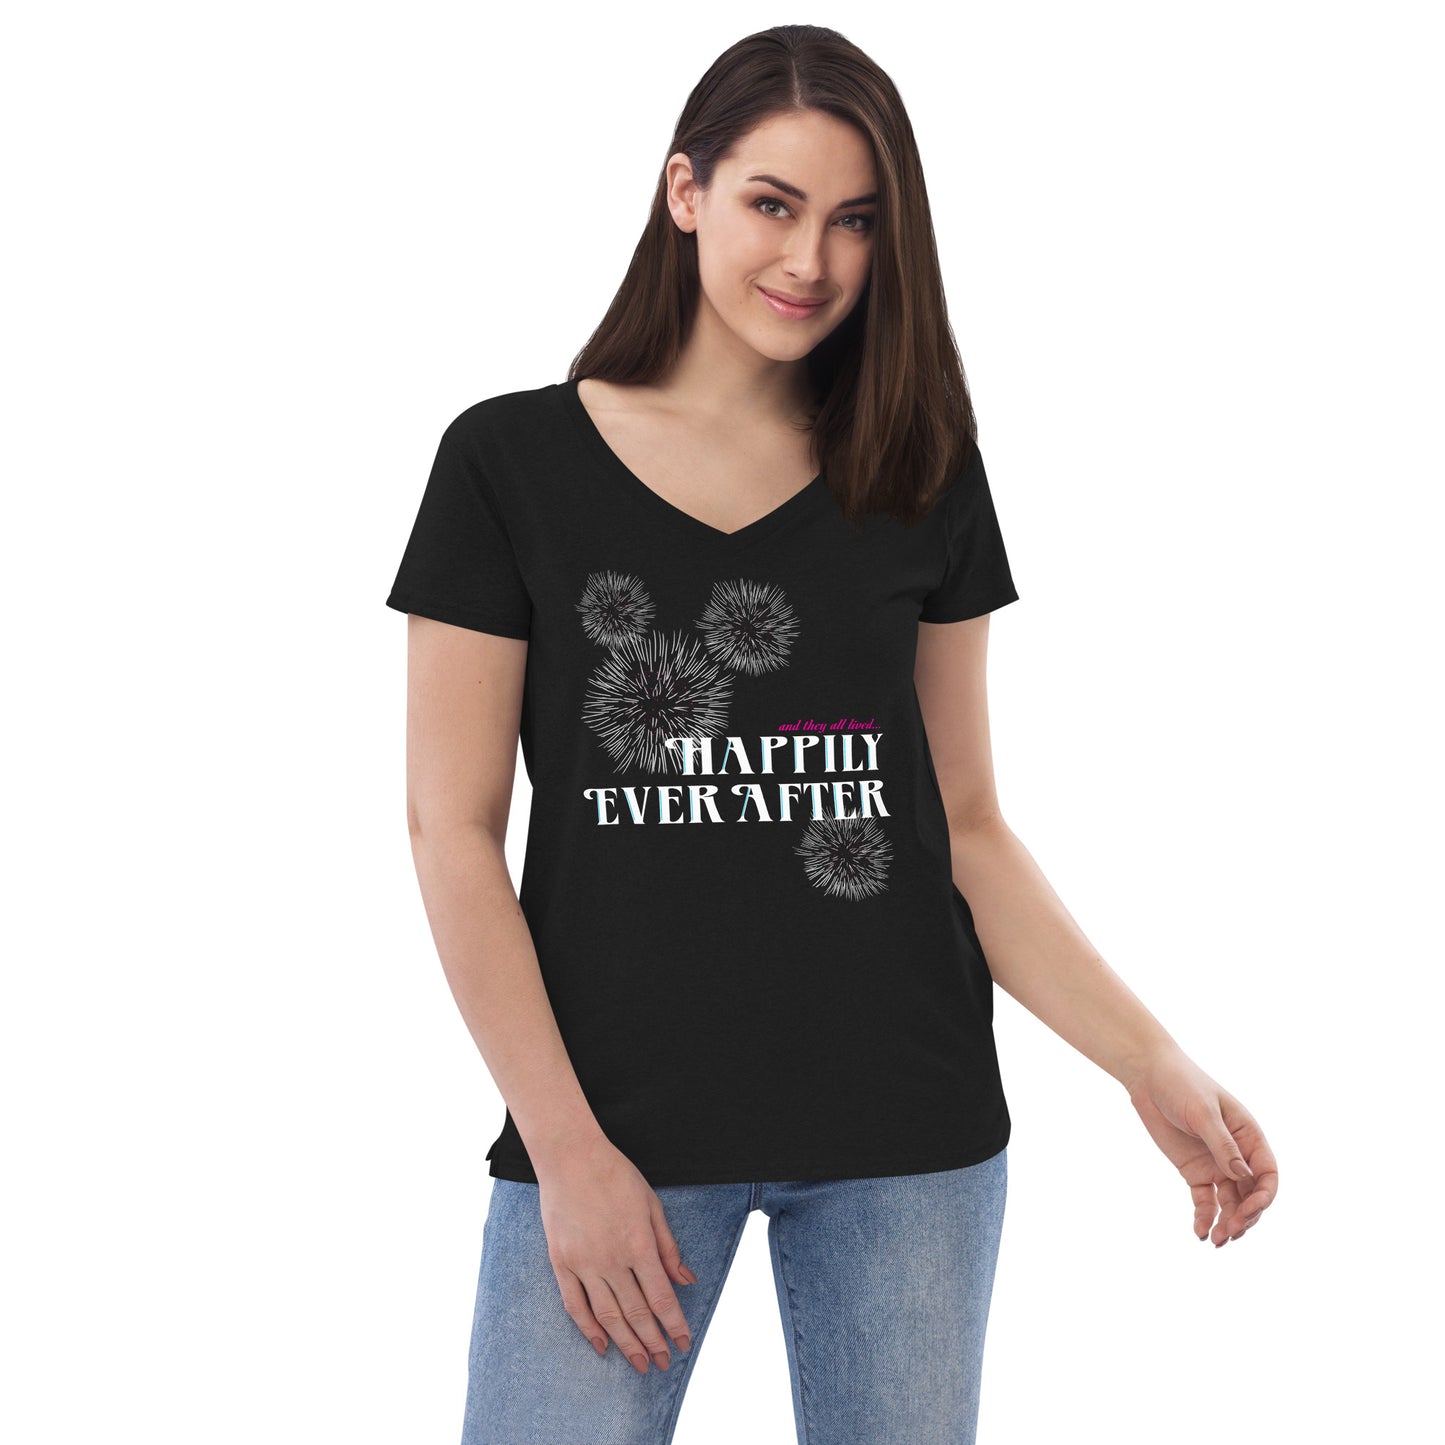 Women’s Happily Ever After V-Neck Tee